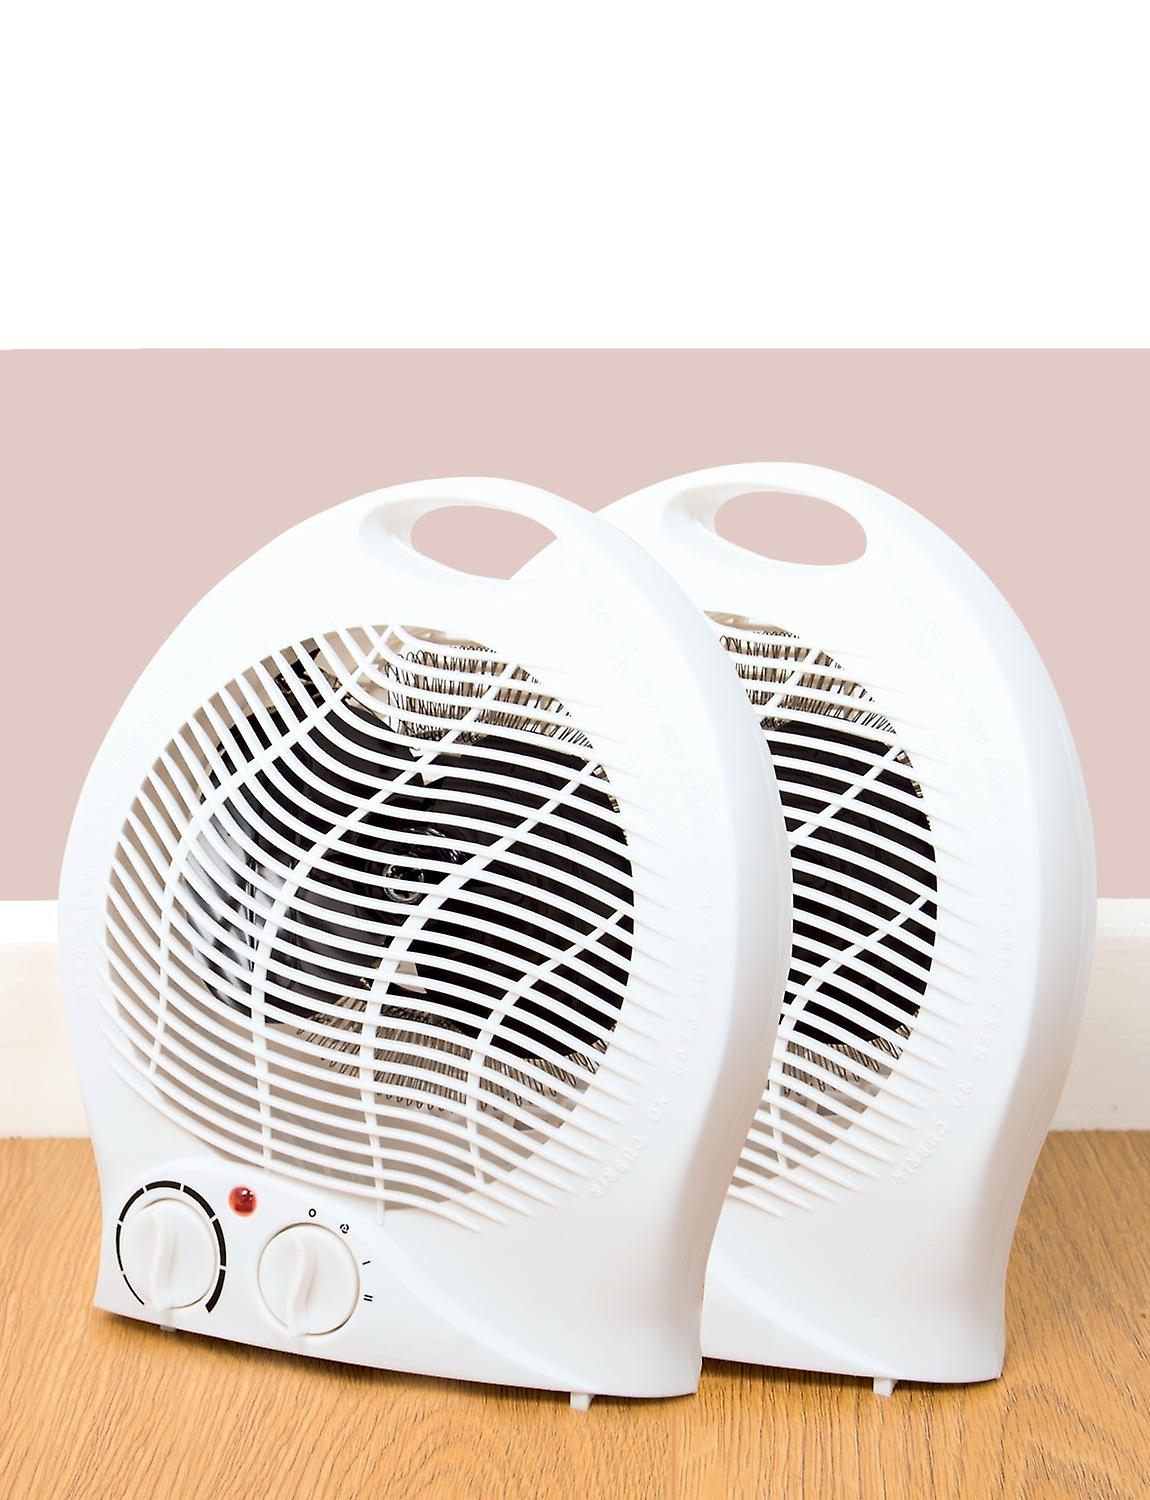 Status Upright Portable Fan Heater 2000w Fh1p 2000w1pkb intended for dimensions 1150 X 1500